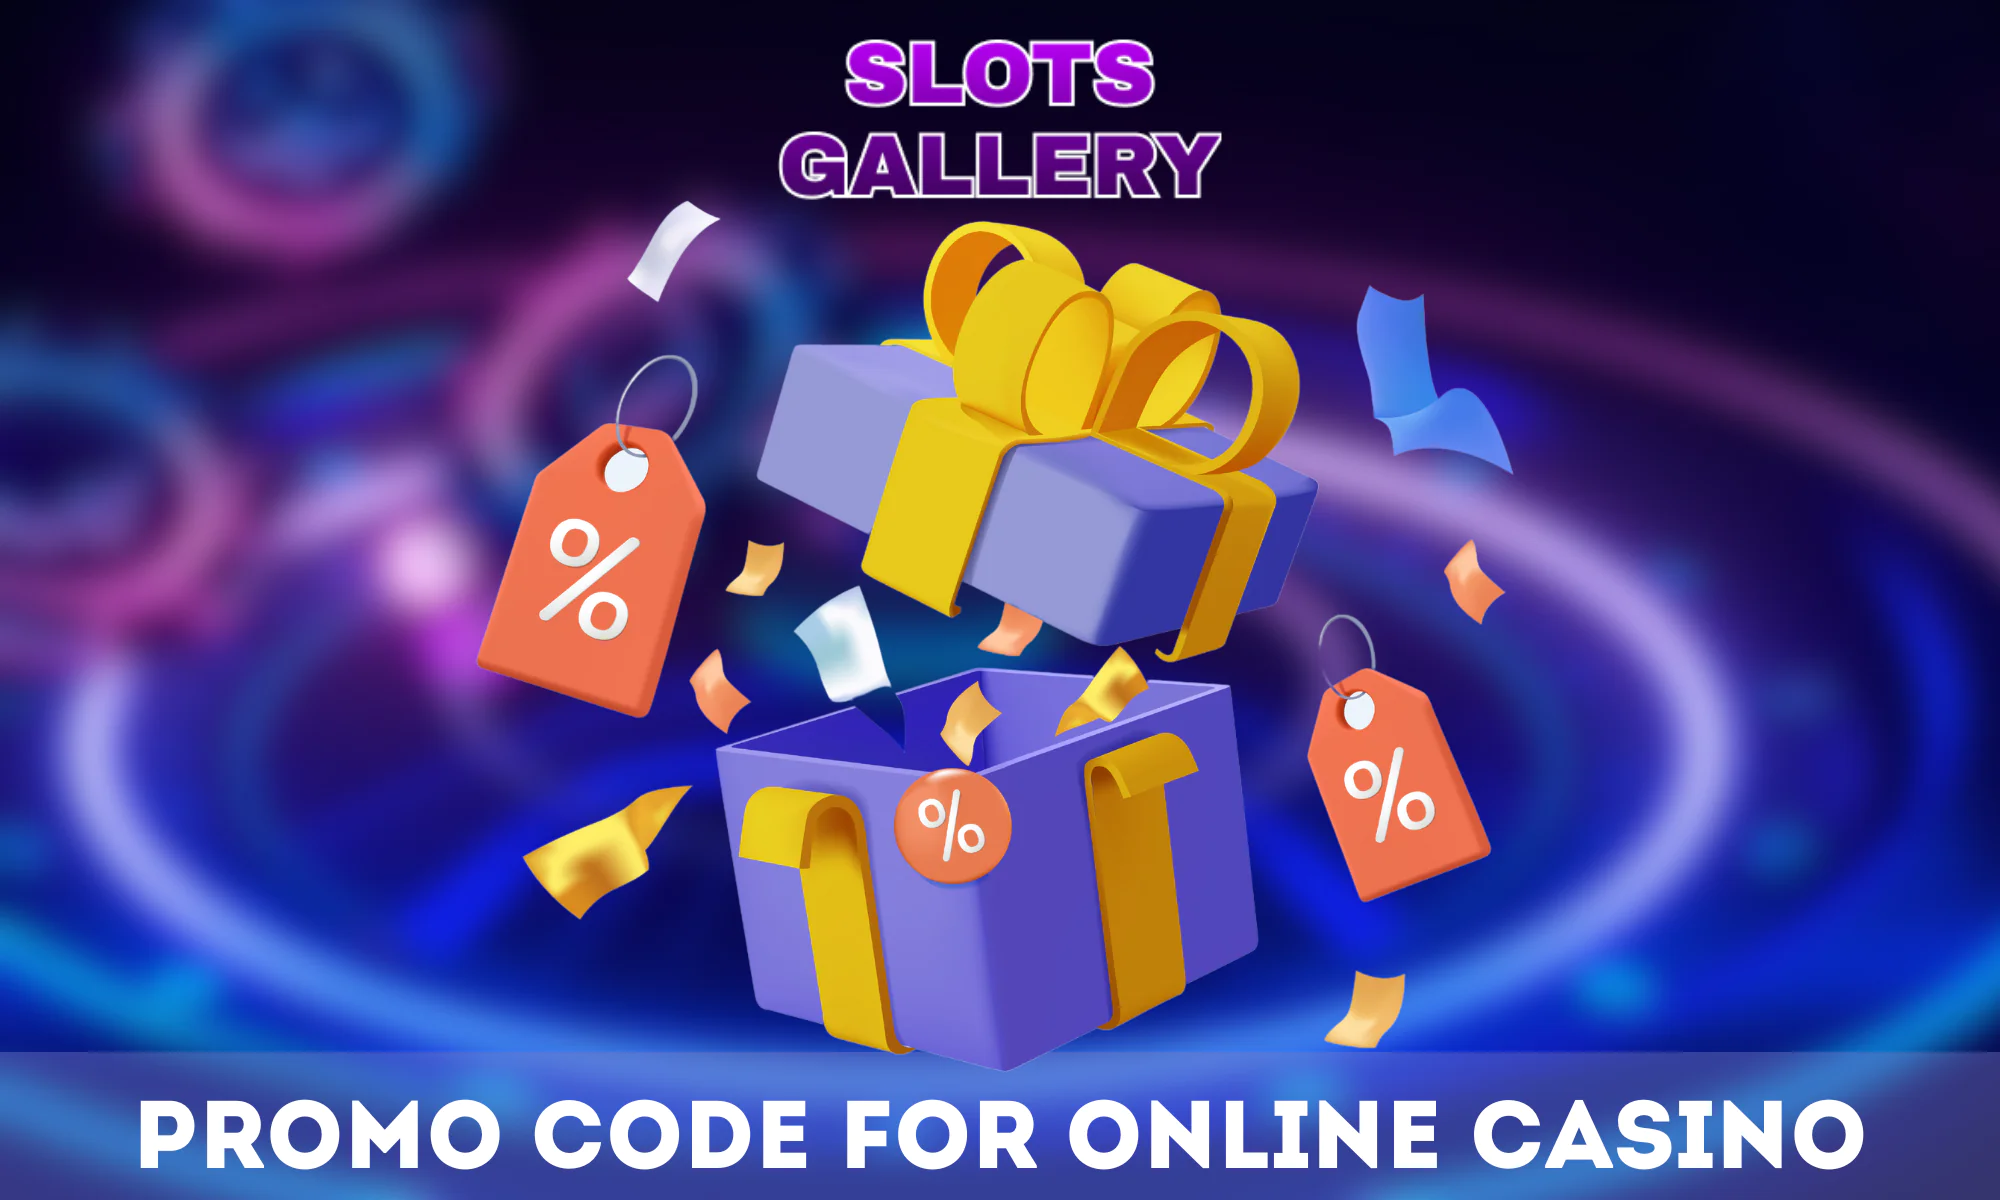 Slots Gallery Casino has an active bonus code at the moment: XXX